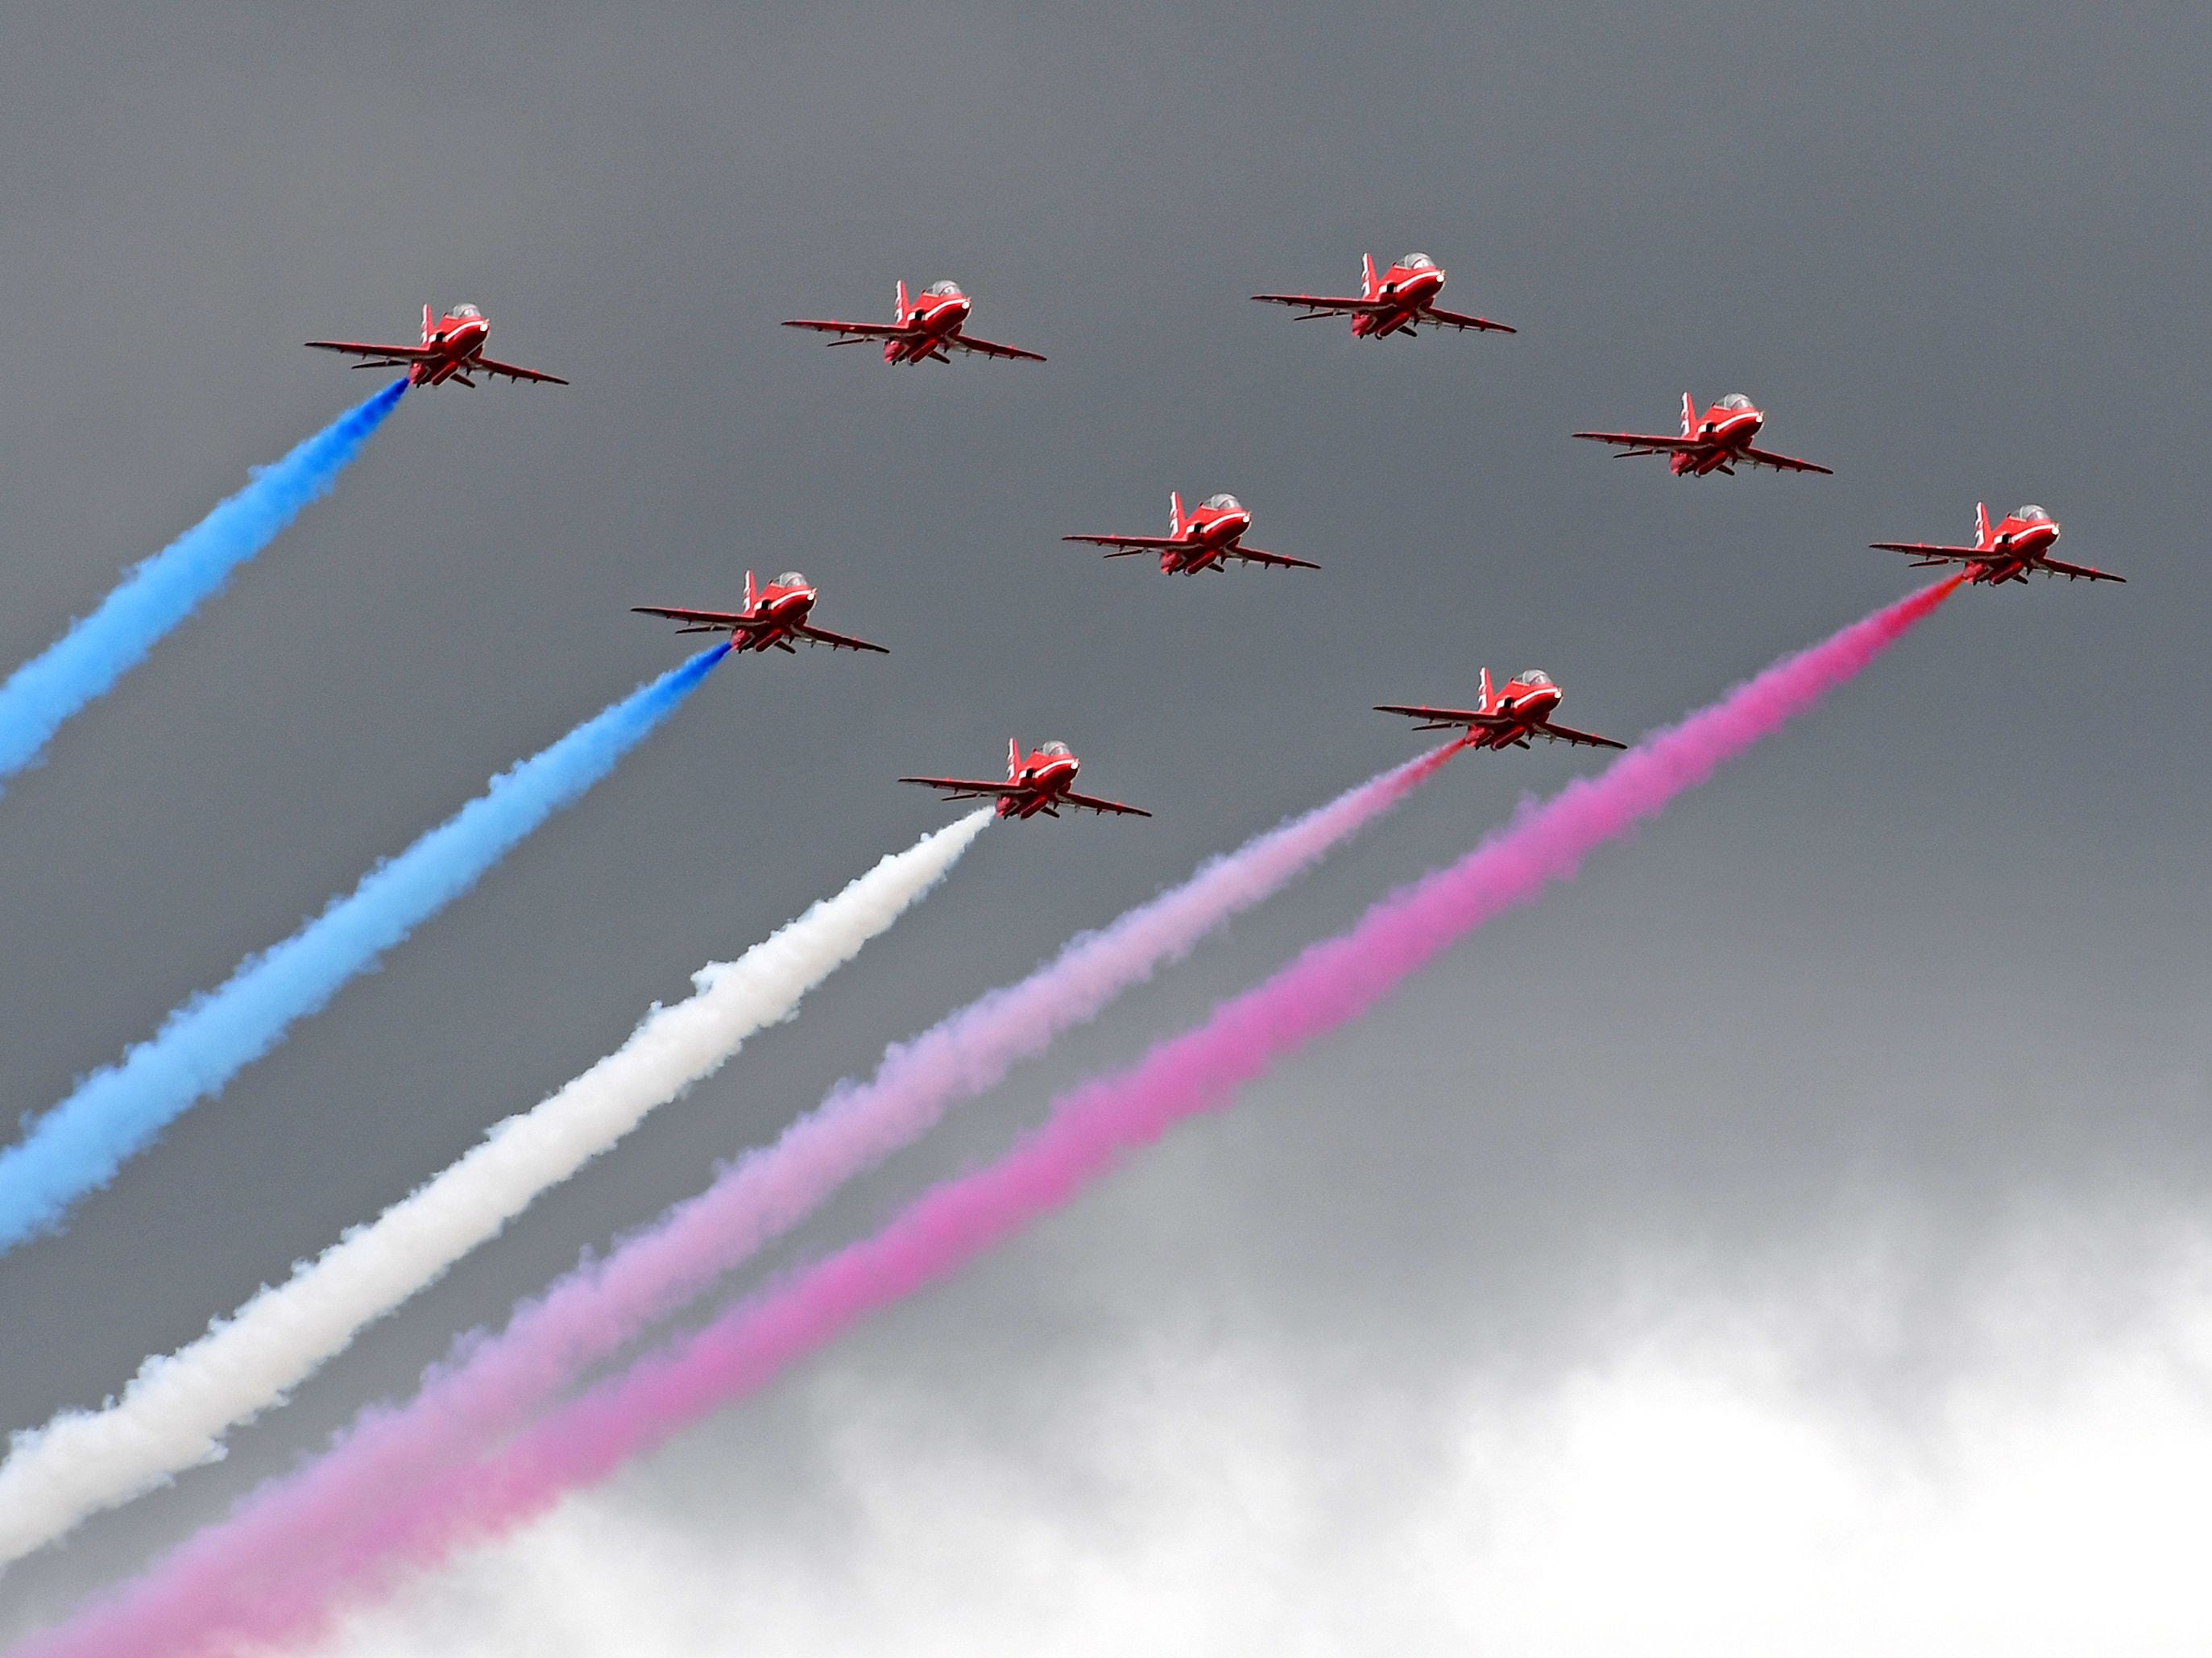 Watch: Planes, military helicopters and the famous Red Arrows amaze and astound at Cosford Air Show